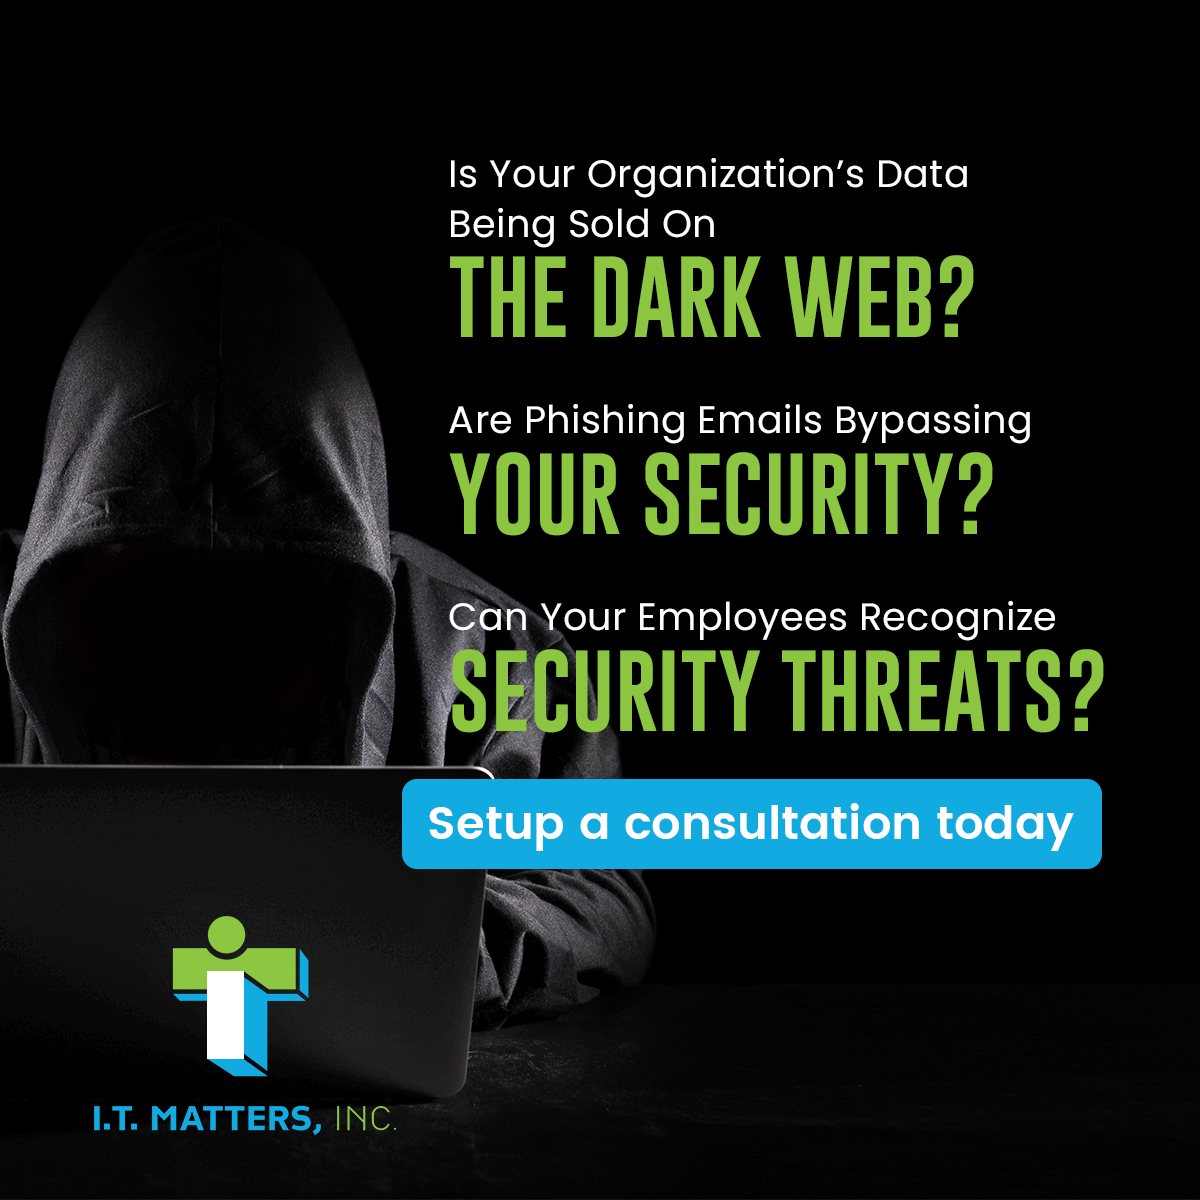 How Your Data Ends Up On The Dark Web (And What To DO About It)